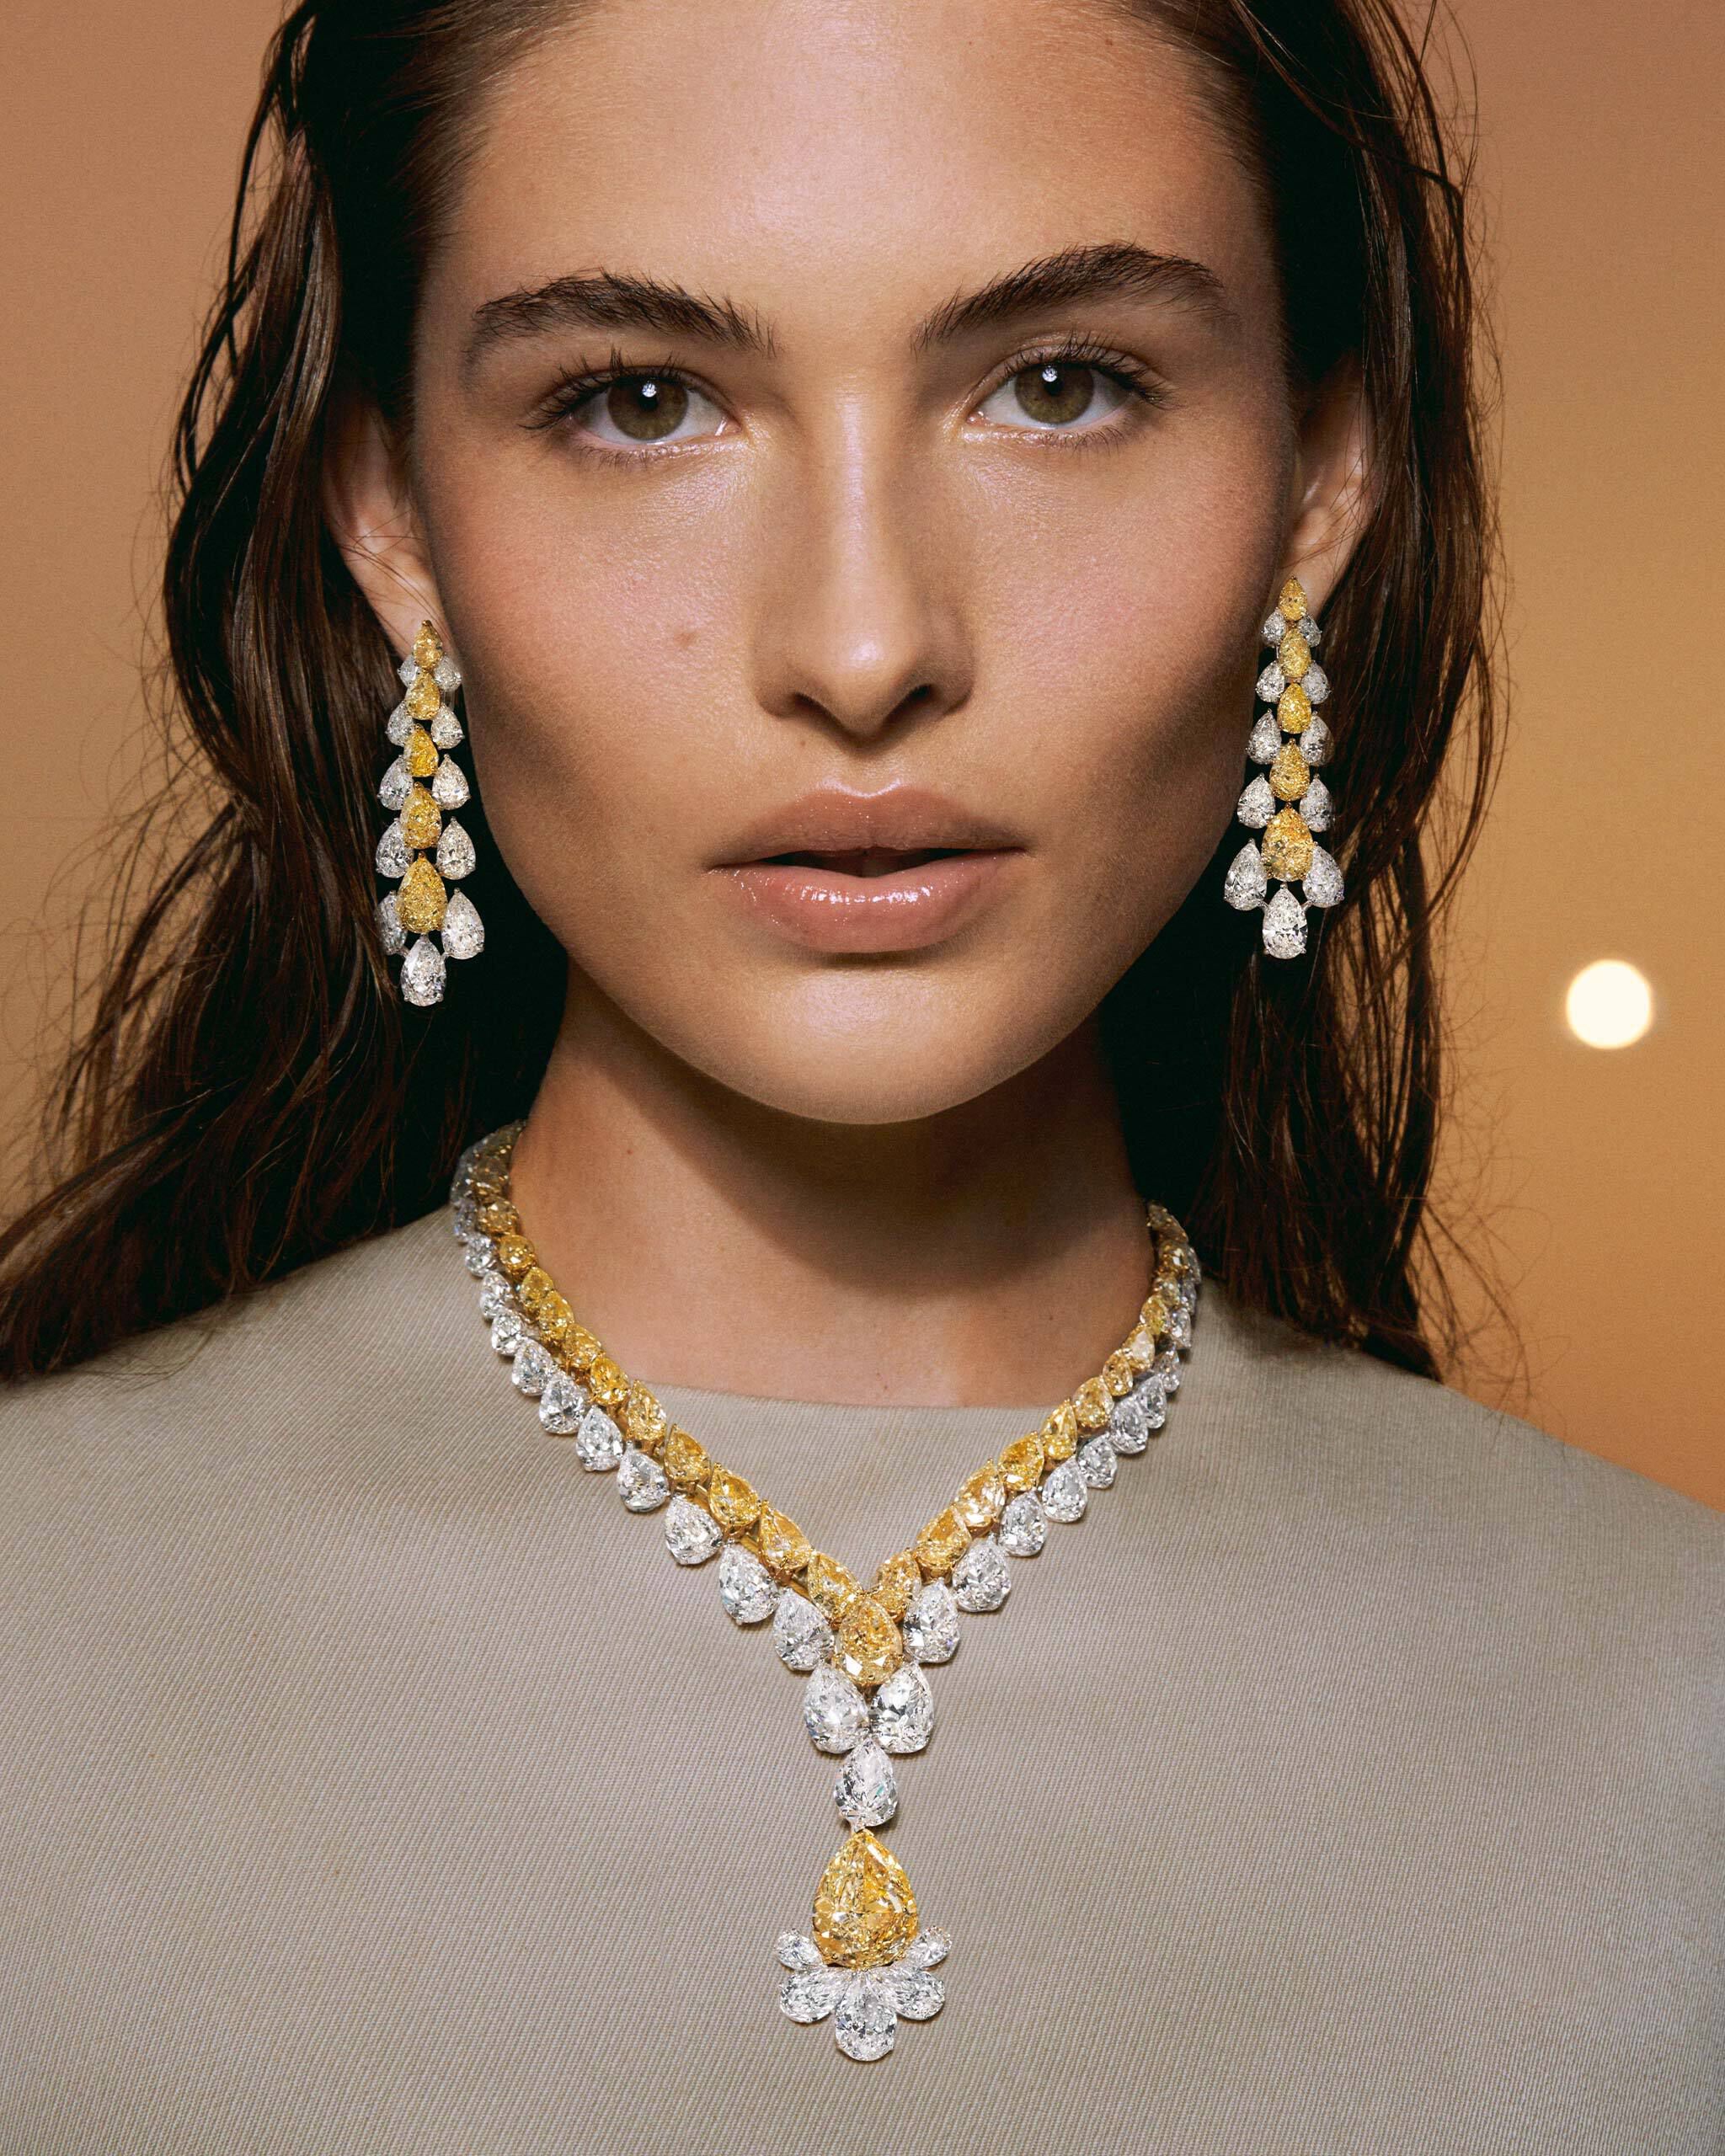 Model wears Graff High Jewellery White Diamond and Yellow Diamond earrings and necklace